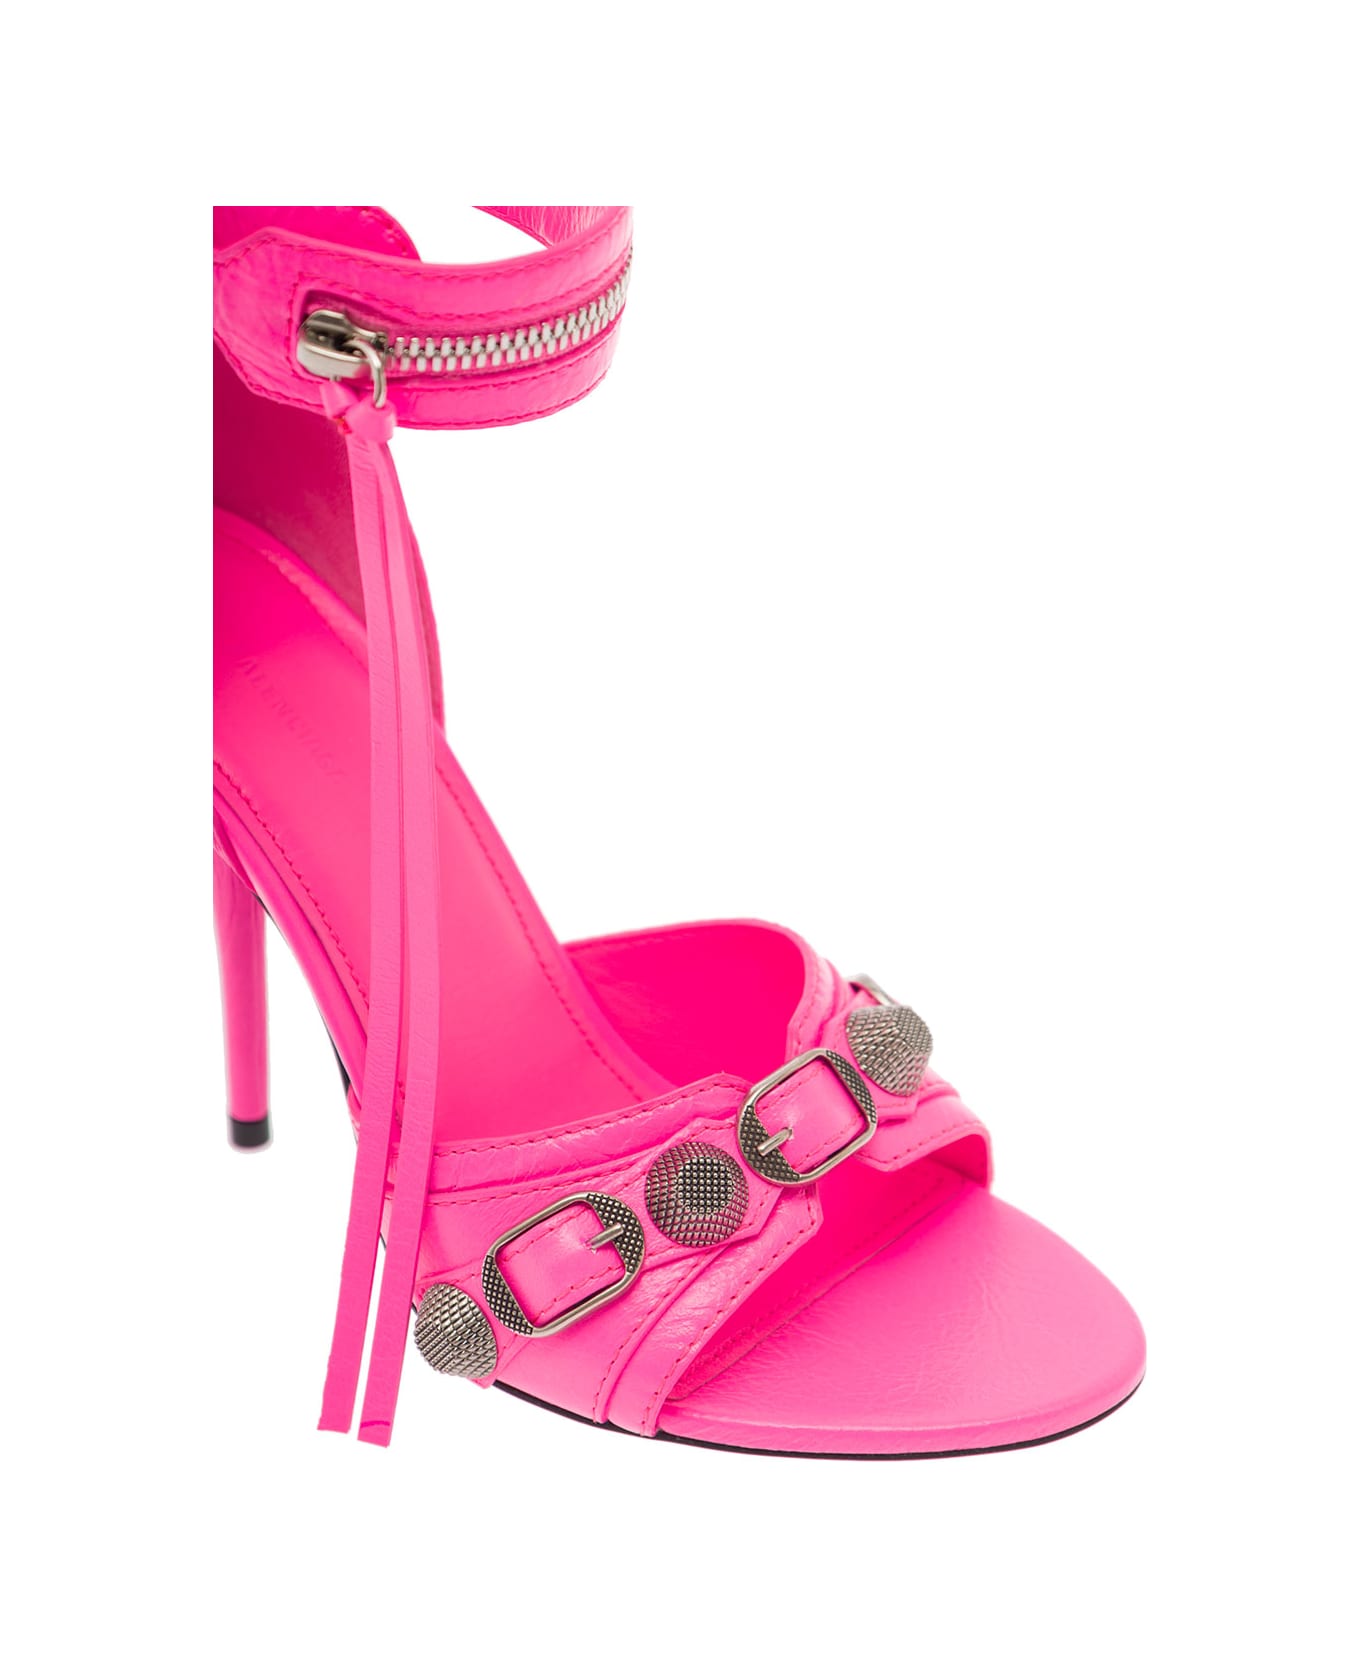 Balenciaga 'cagole' Fucsia Sandals With Studs And Buckles In Leather Woman - Pink サンダル